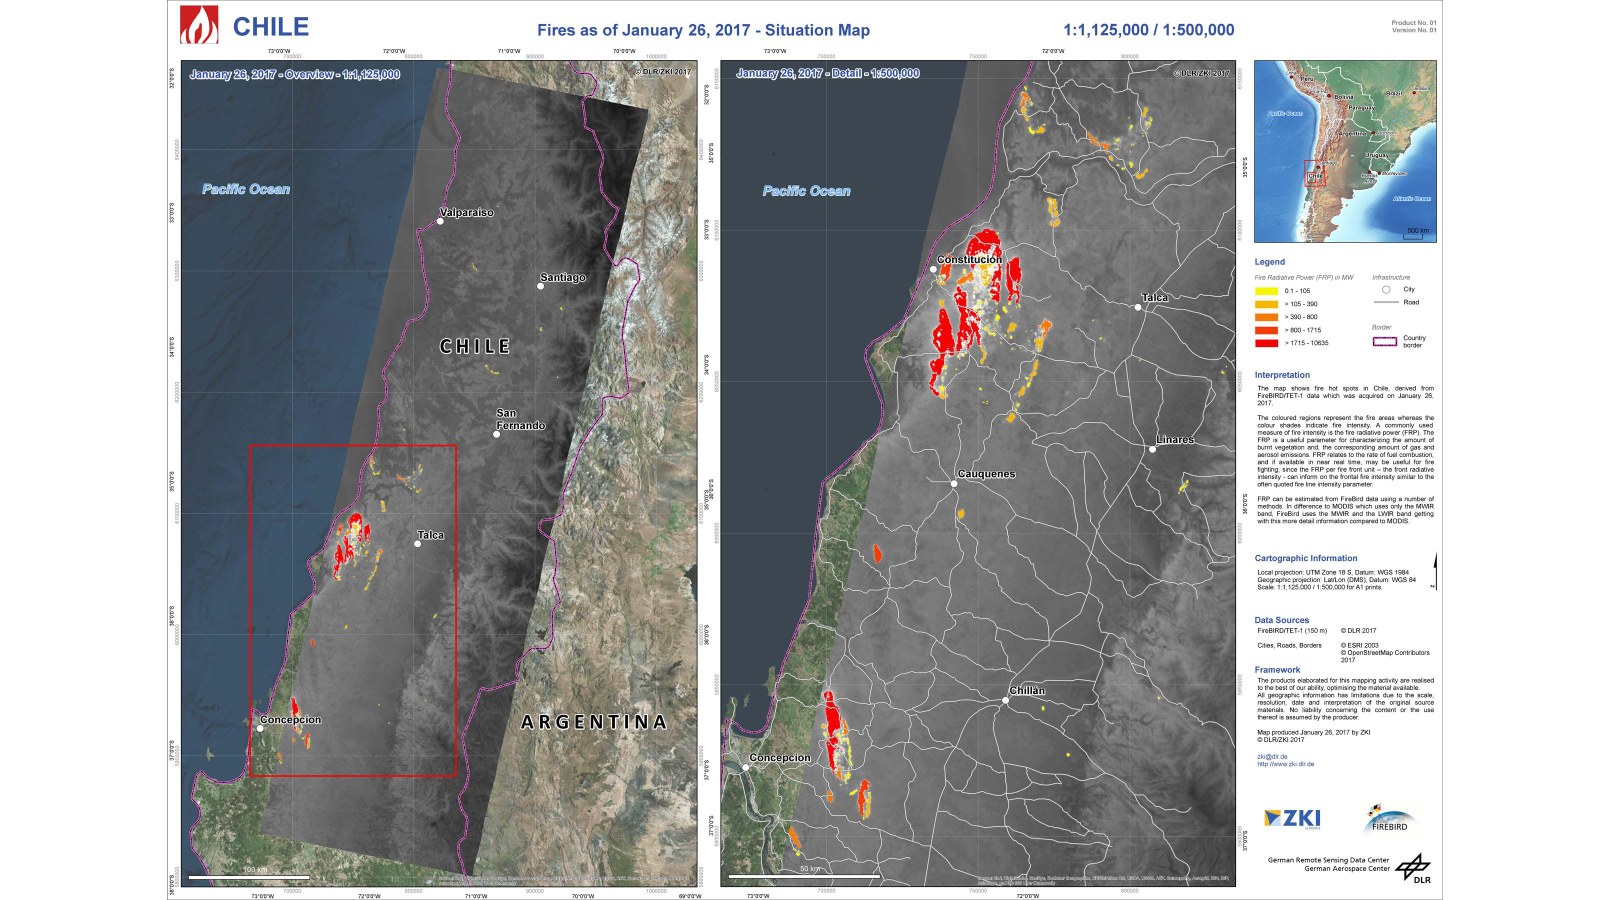 Situation map of the fires in Chile